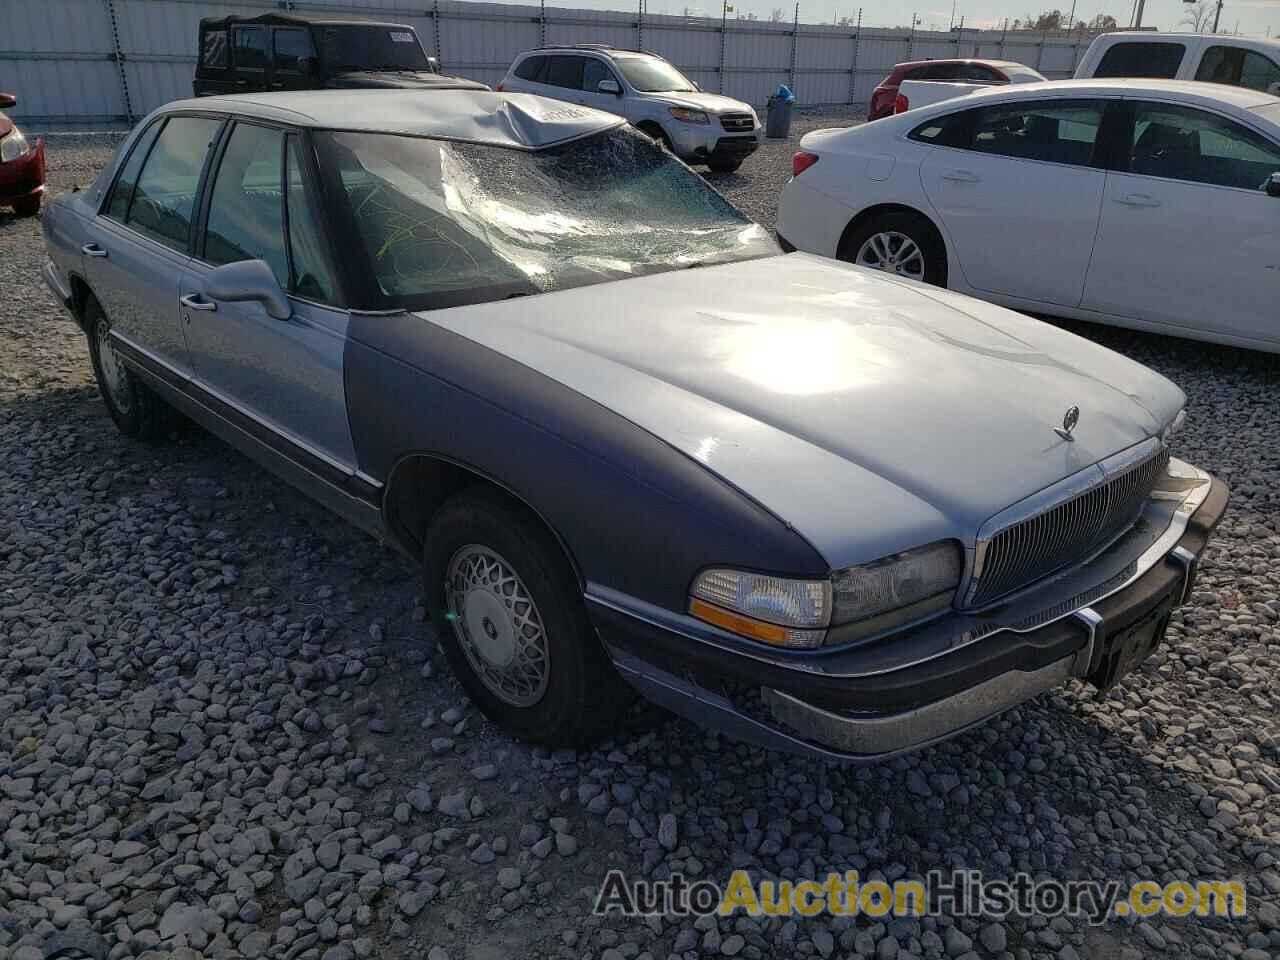 1994 BUICK PARK AVE, 1G4CW52LXR1629672